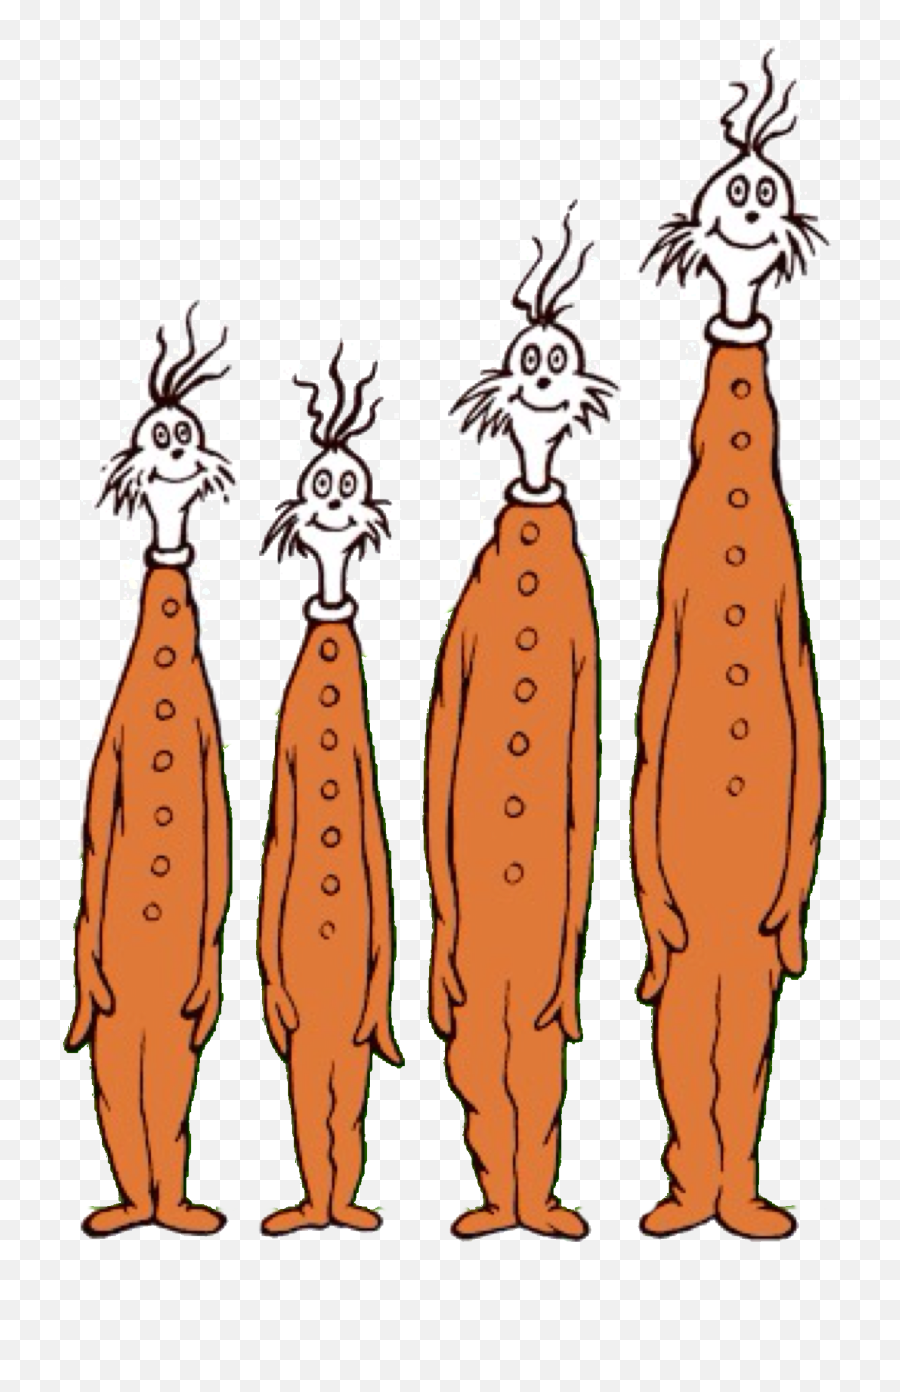 Download All Tall Guys - Dr Seuss Characters Tall Full Dr Seuss Characters Png,Dr Seuss Png